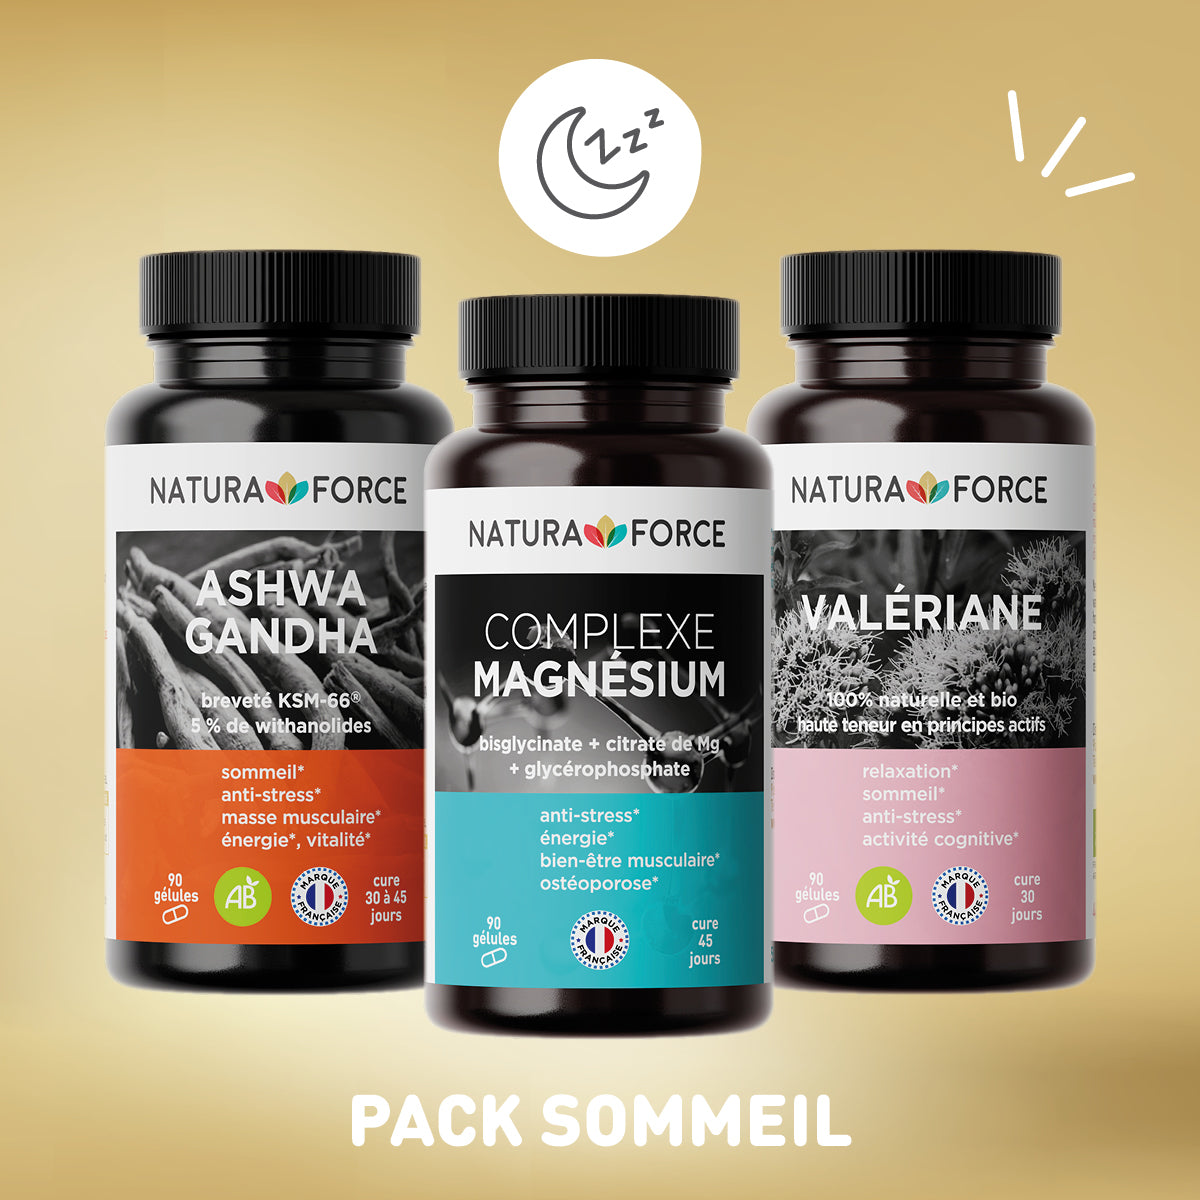 Pack sommeil